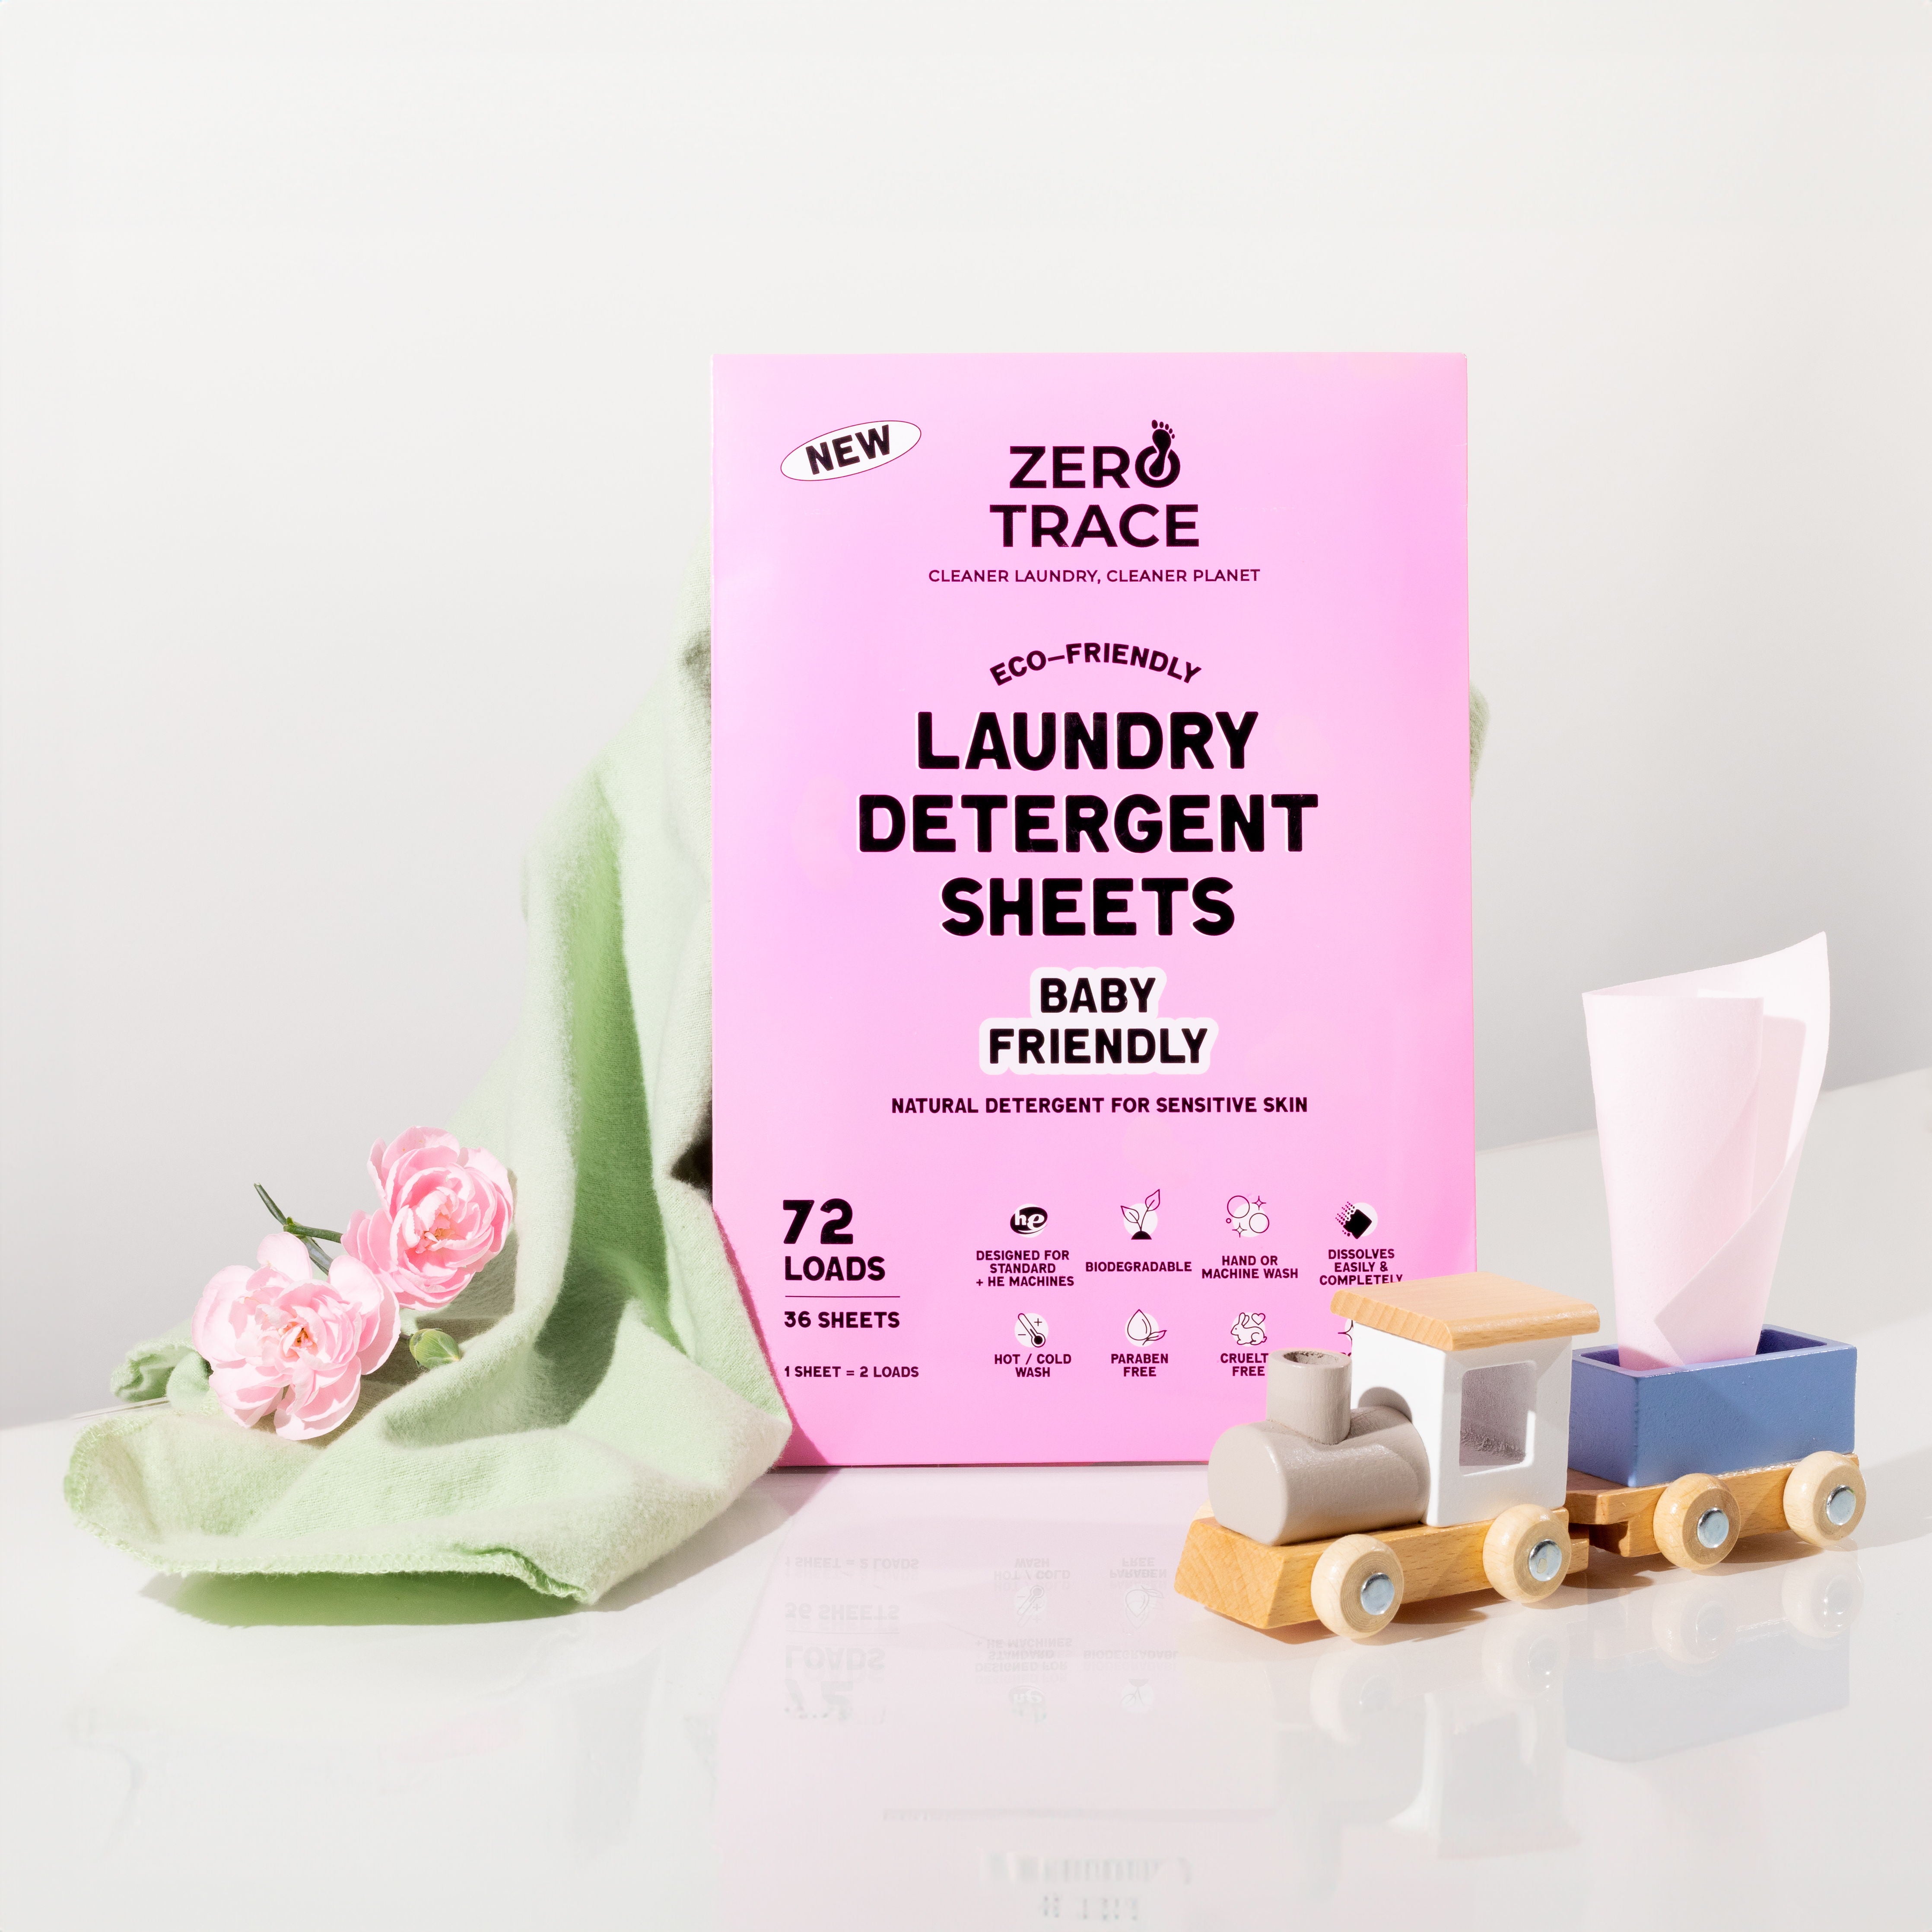 Zero Trace laundry detergent sheets in a pink box next to a wooden toy.